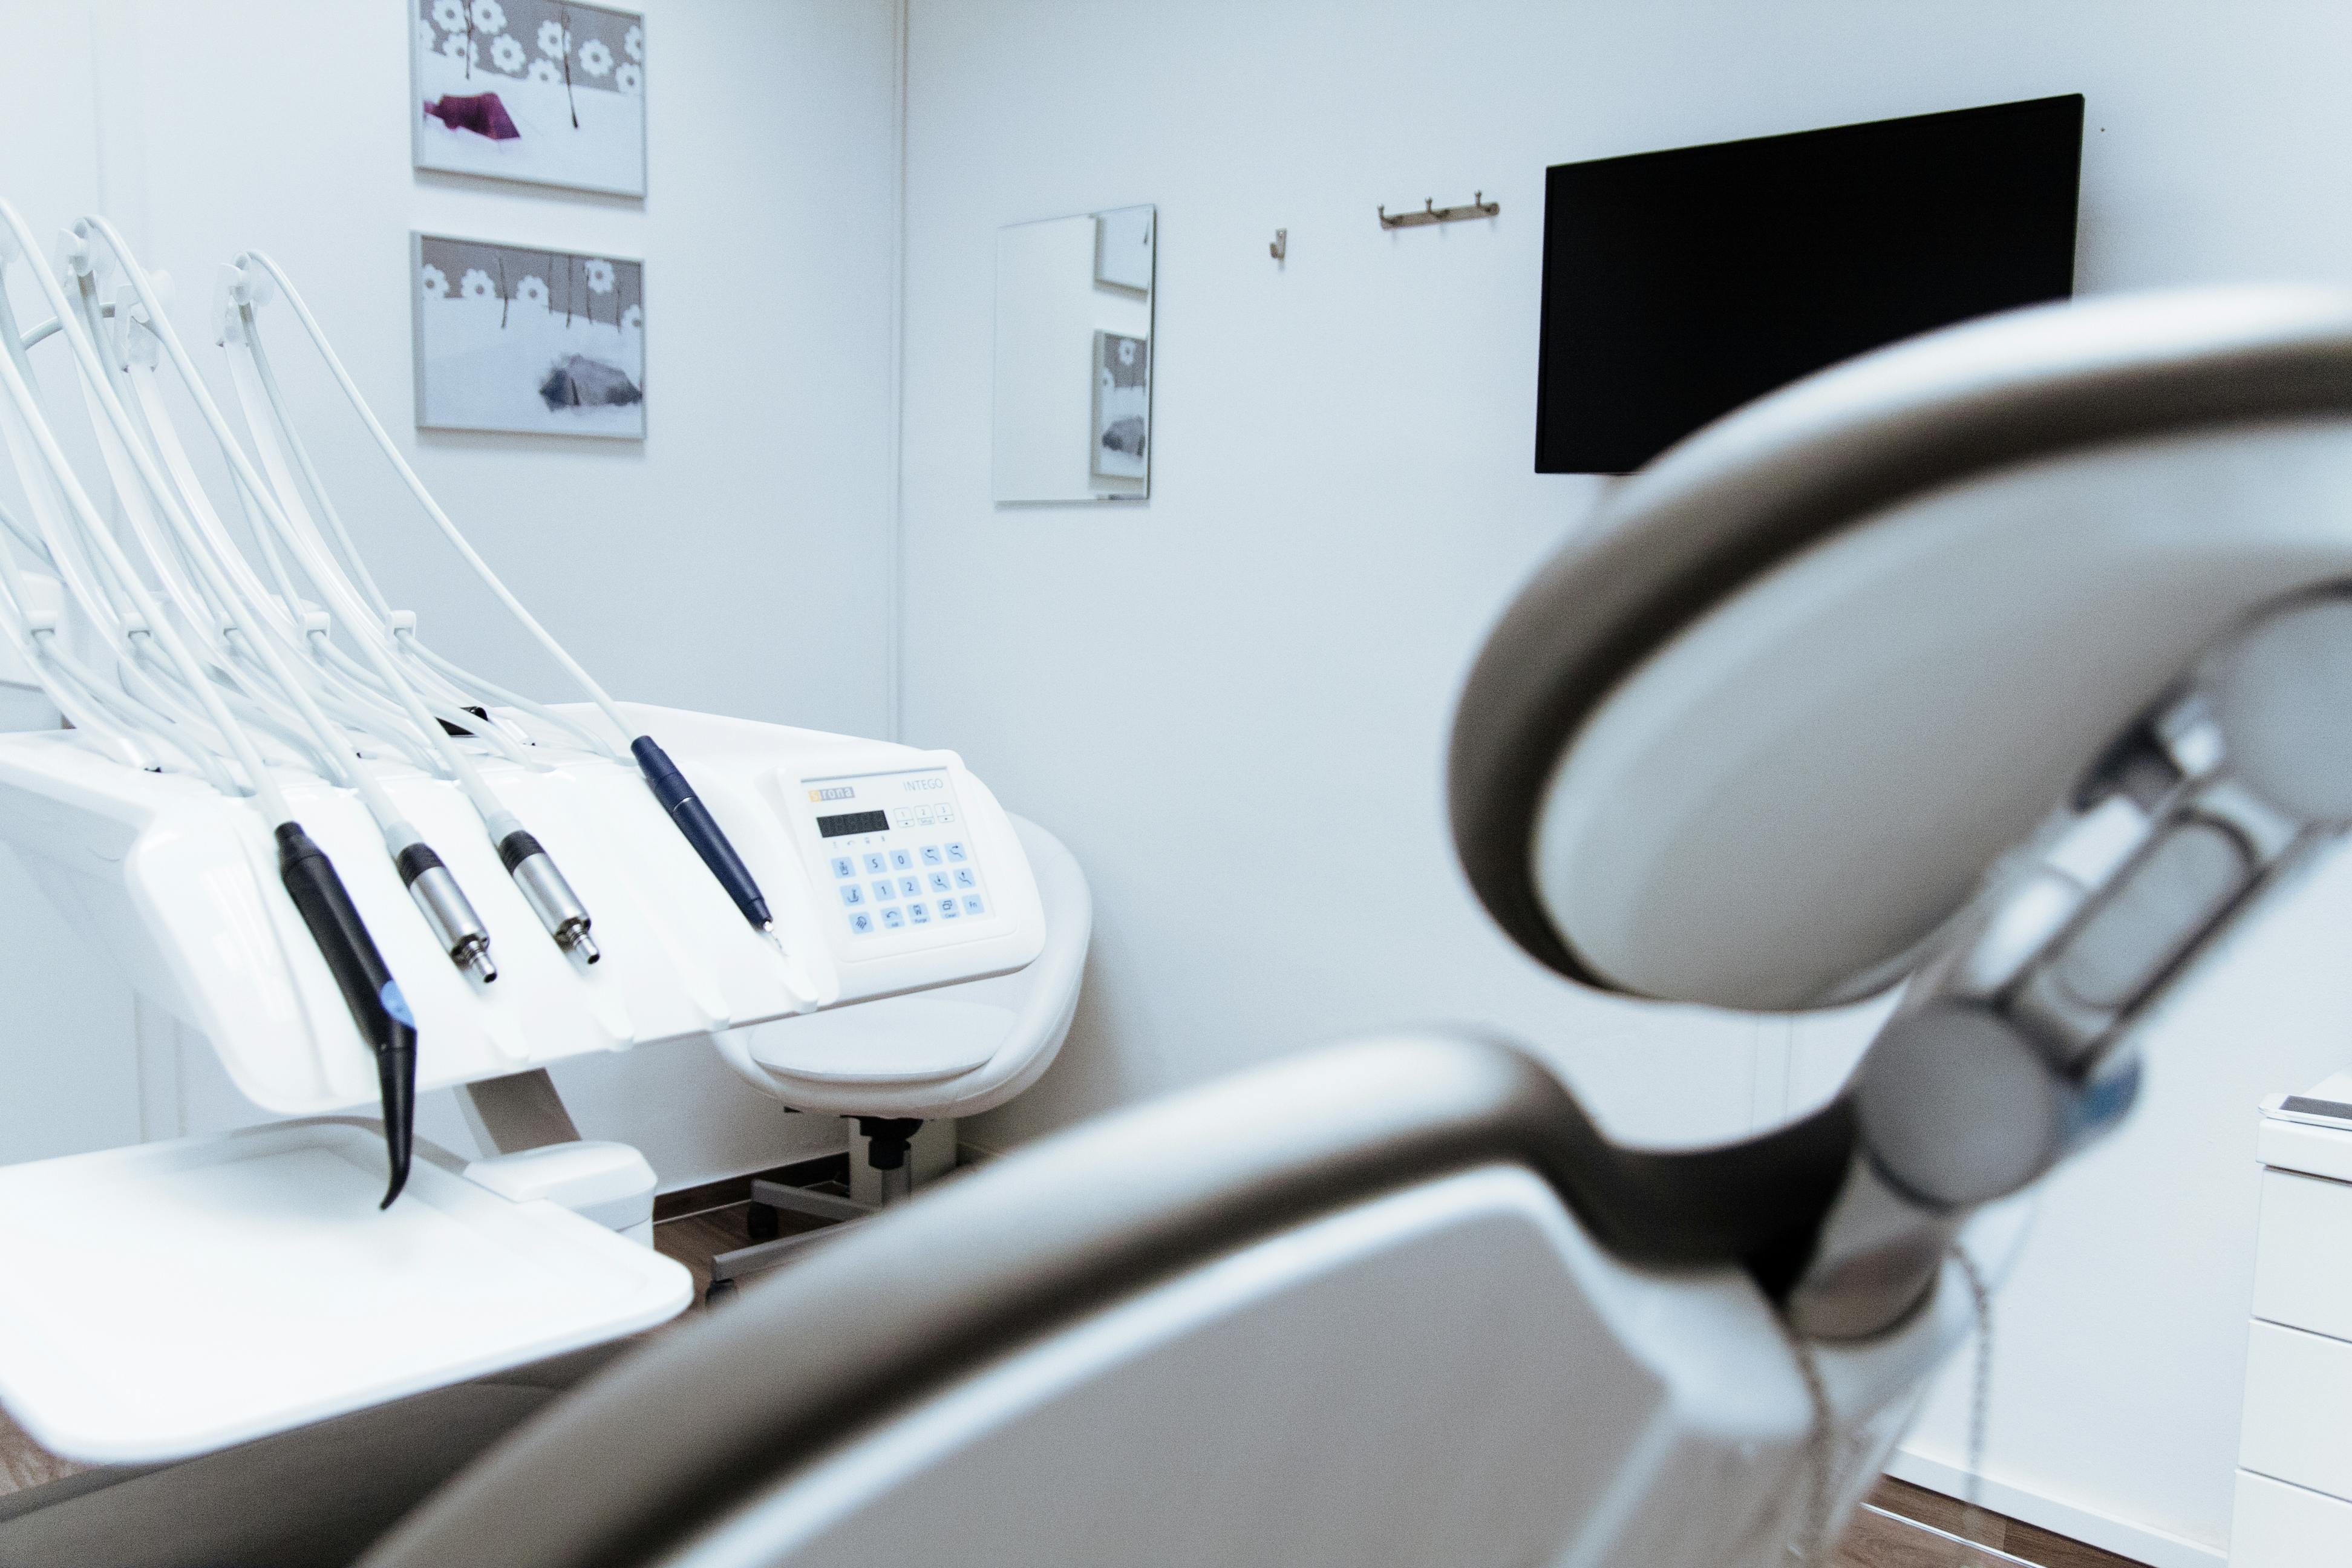 How Do Intraoral Scanners Work?